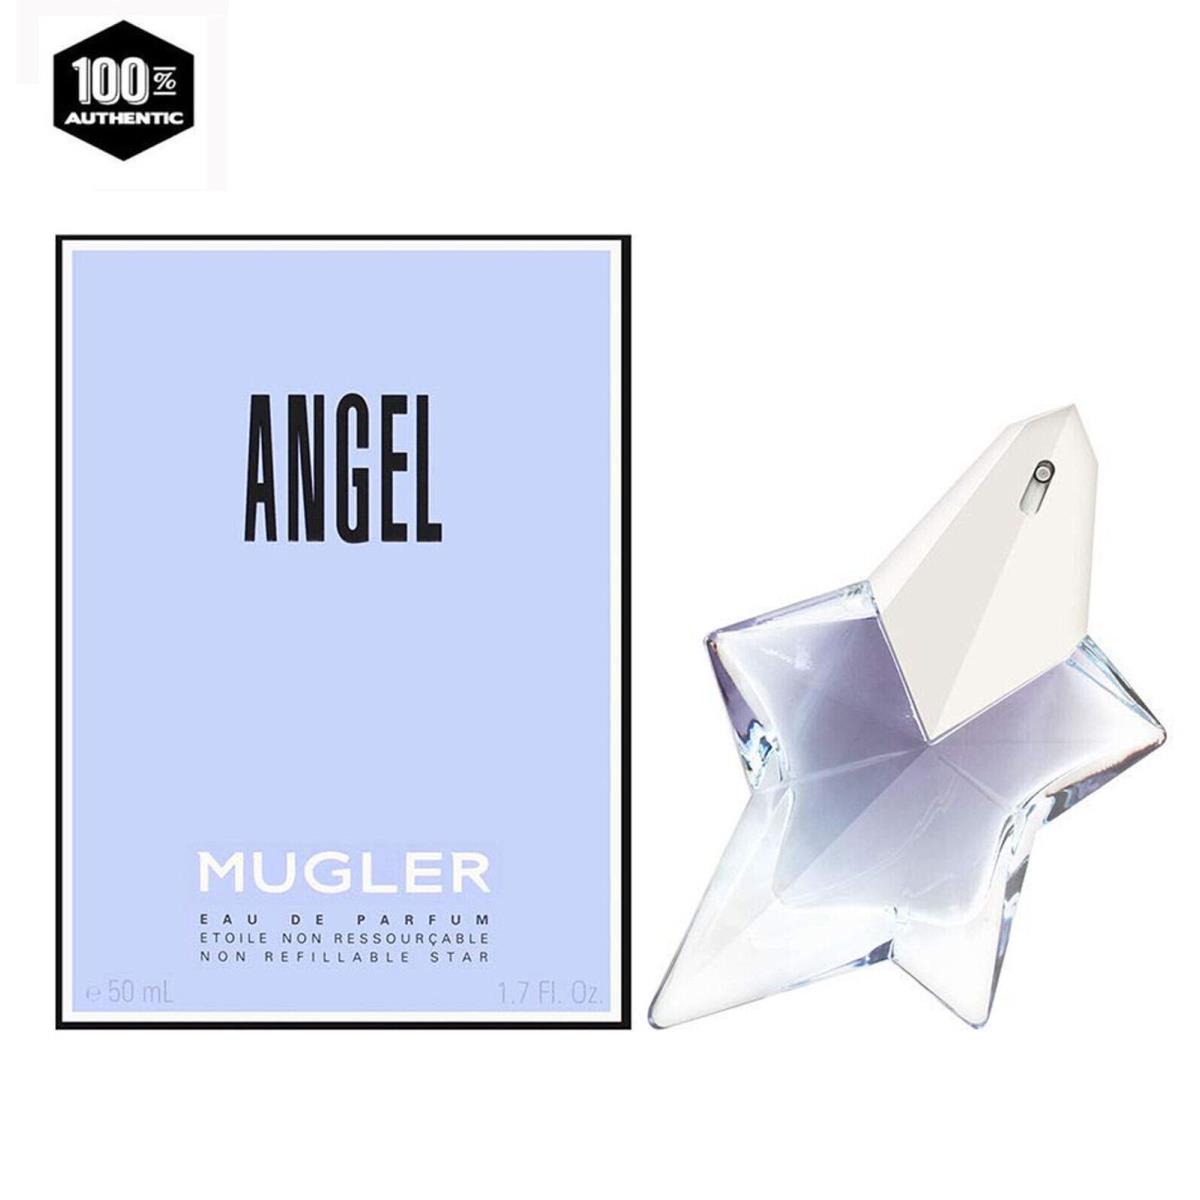 Angel Perfume by Thierry Mugler 1.7 oz / 50 ml Edp Spray Refillable For Women